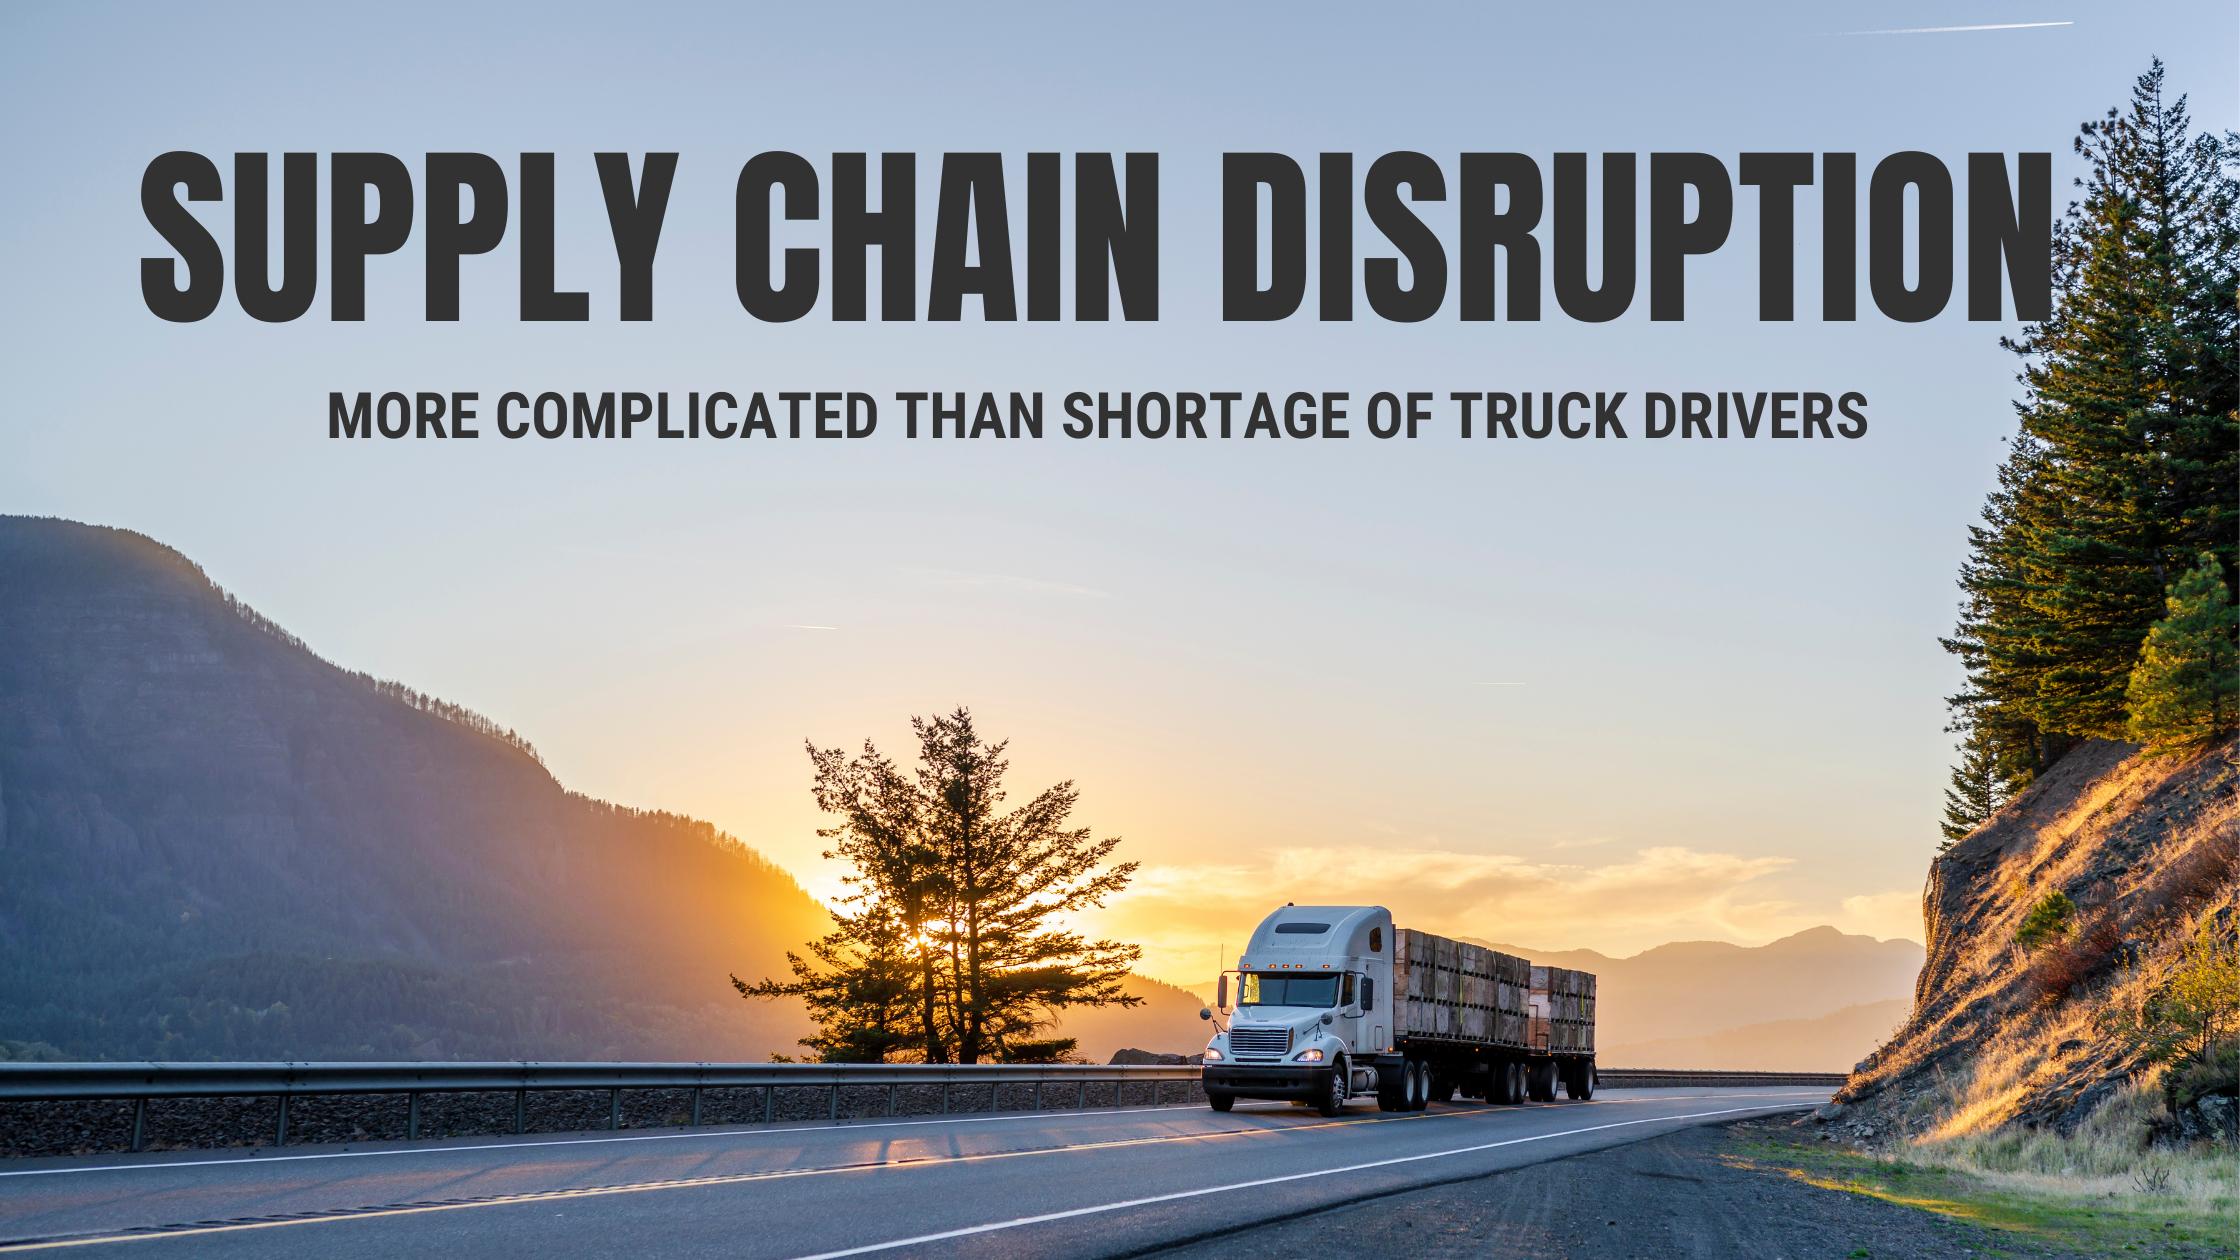 Supply Chain Disruption: More than a shortage of truck drivers